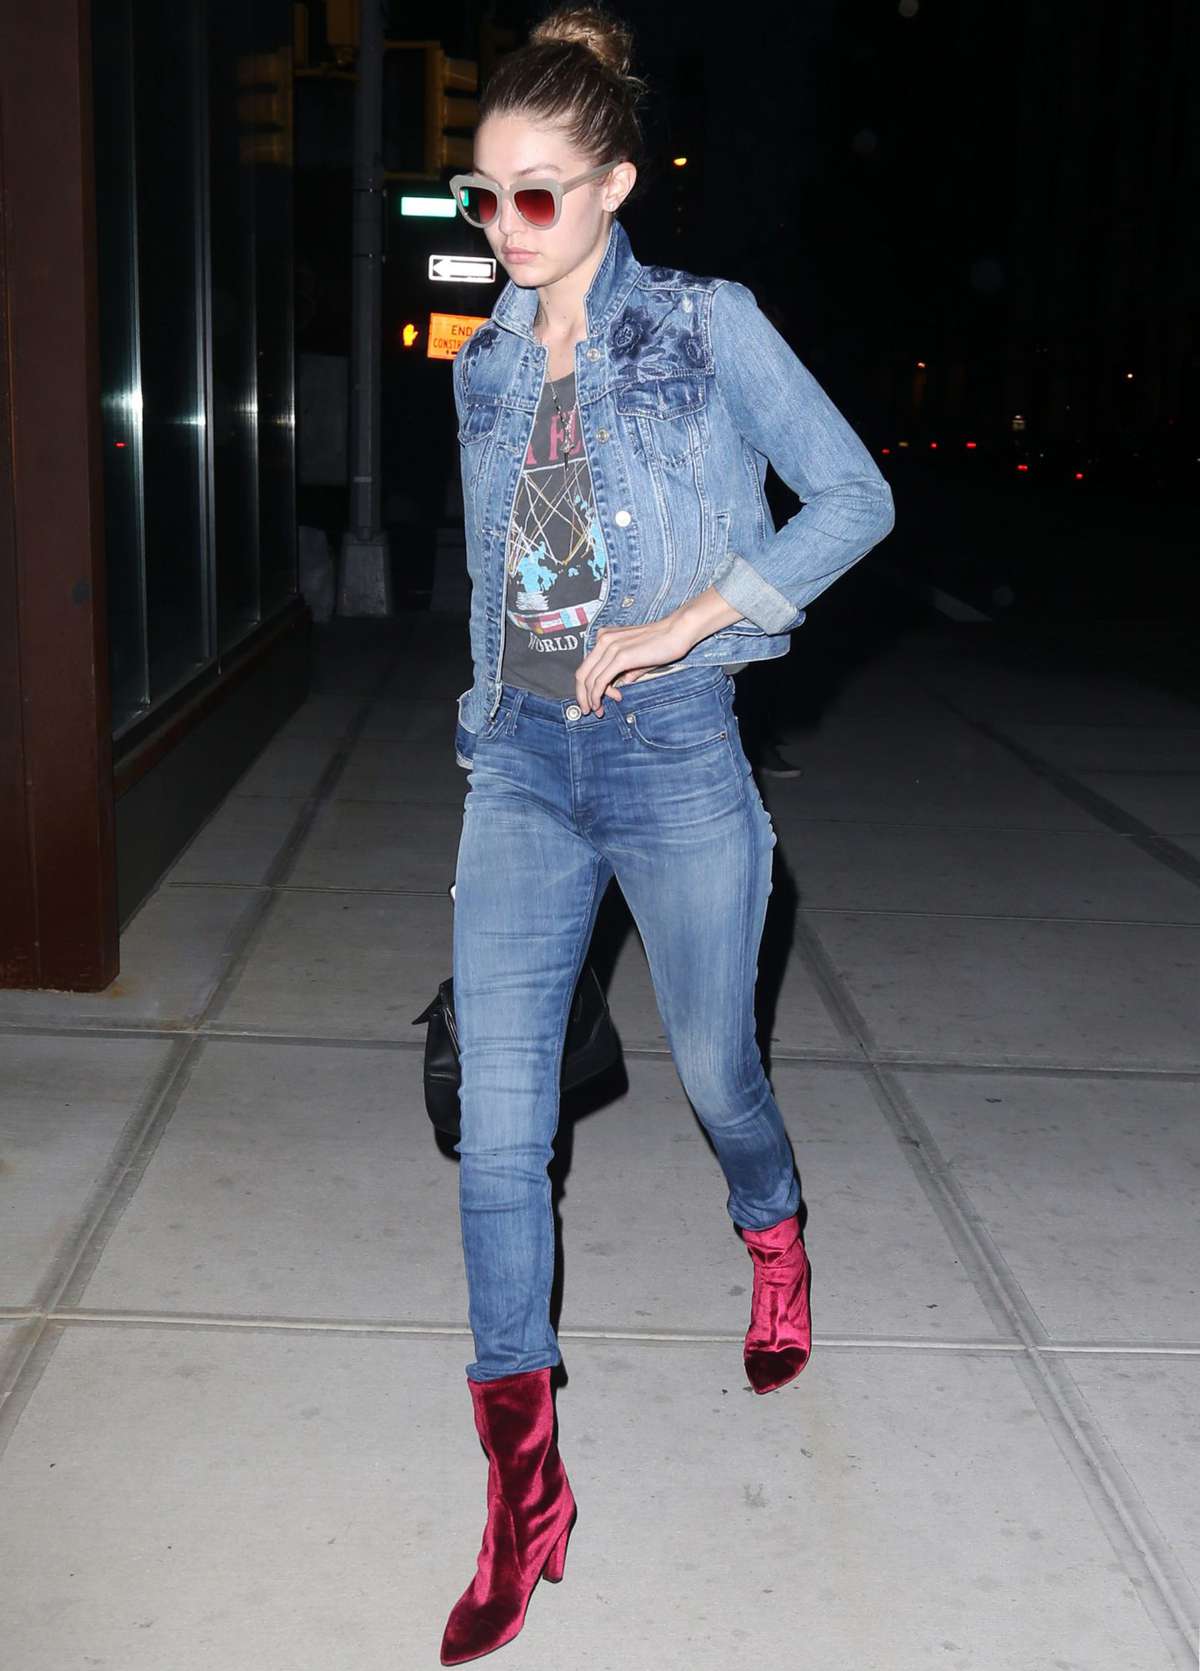 Model Gigi Hadid out and about in New York City, New York on June 16, 2016. She wore a jean jacket with matching jeans and bright red boots. Gigi and one of her best friends Kylie Jenner were criticized by a model, who stated that they were not considered